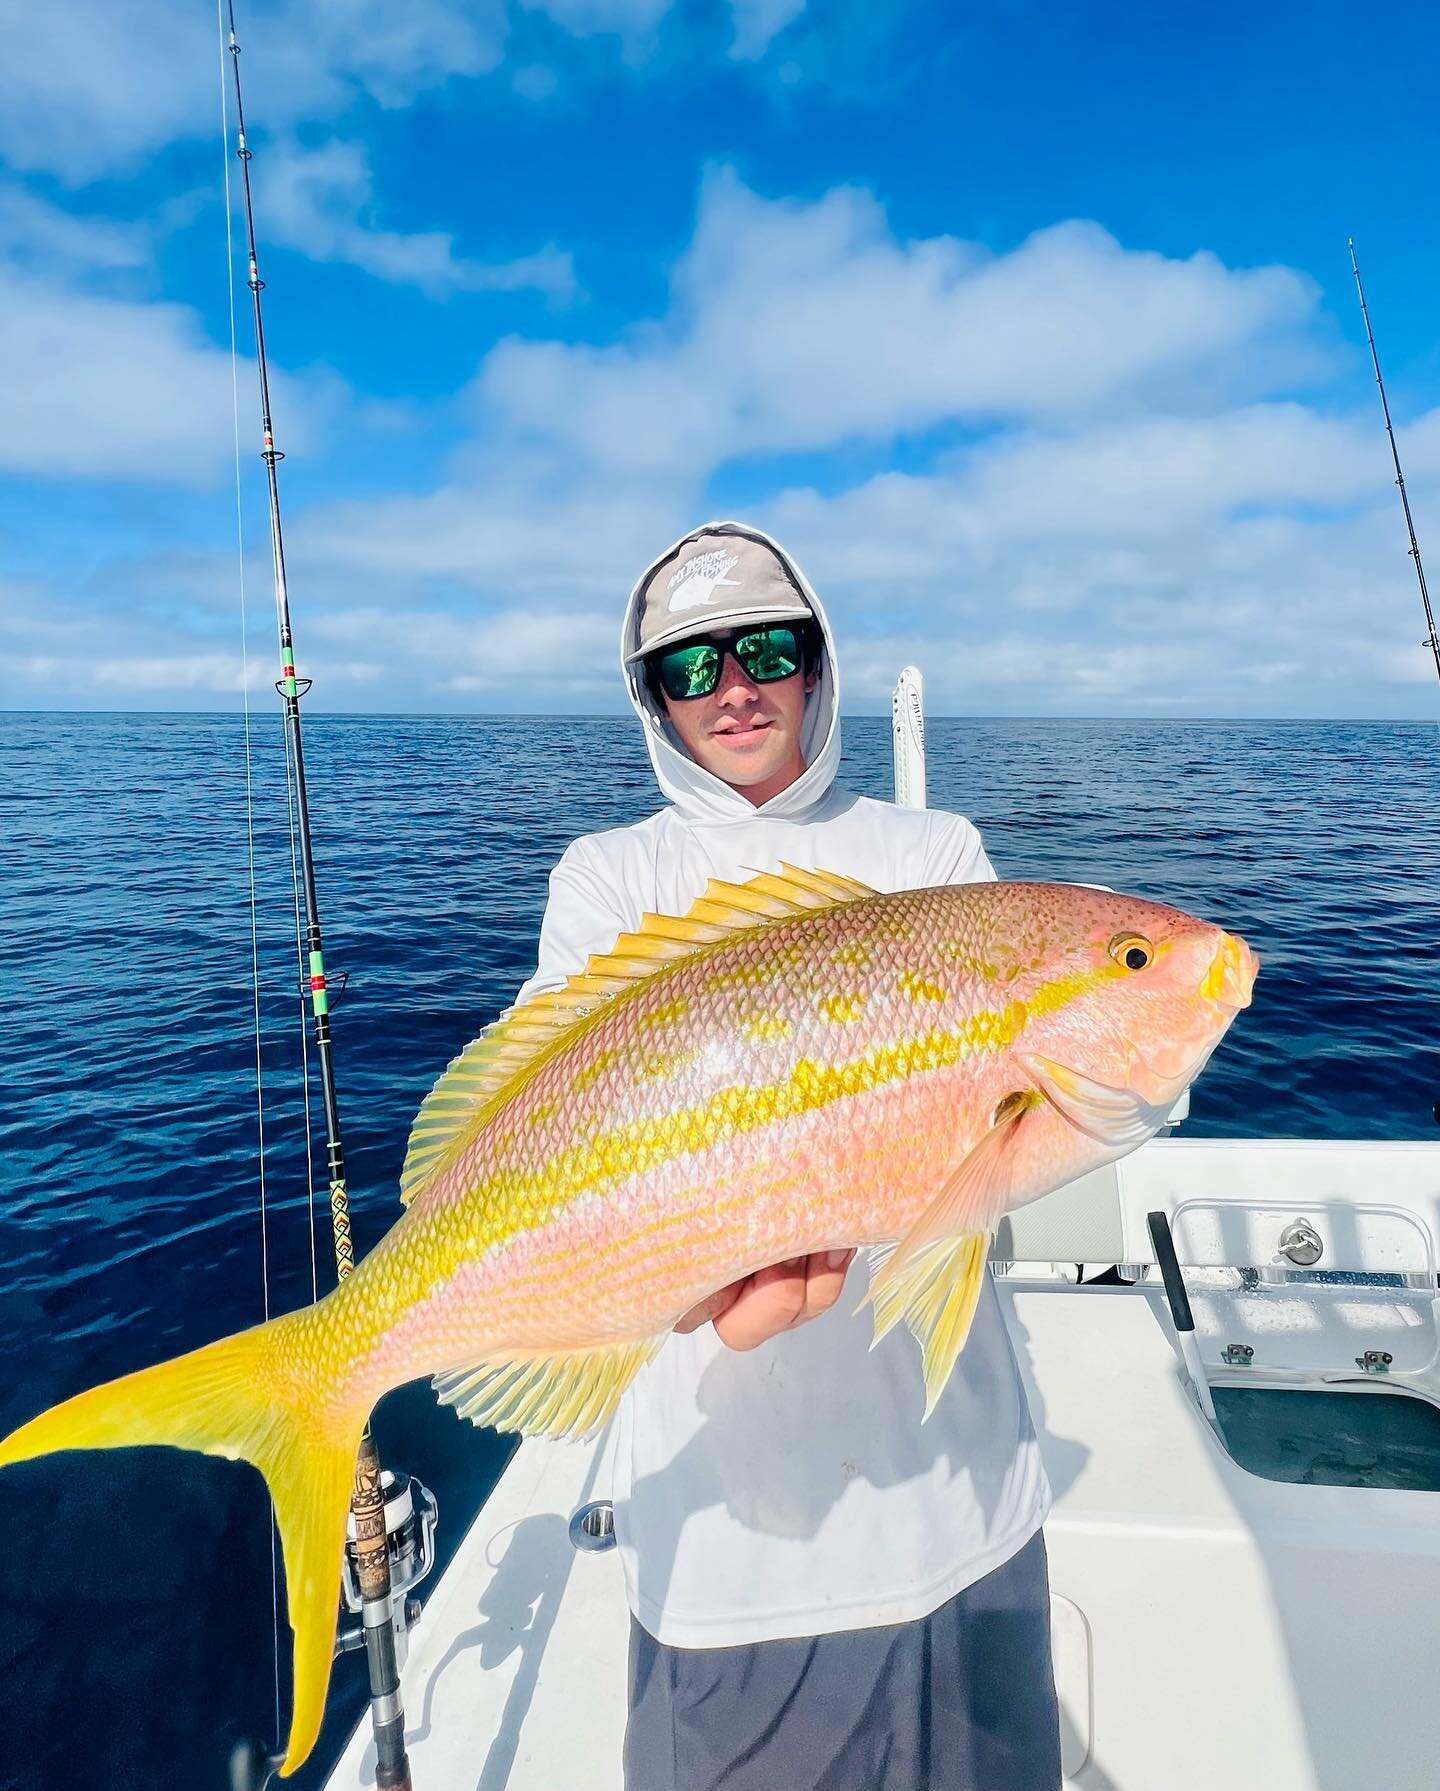 Slick Richard &amp; a day off calls for a send fun trip aboard @captaustingoncalves @ami_sportfishing_charters 26 Stapleton. Got dialed in on the #largemodel #yellowtails get in on the action @ami_offshore_fishing 
#annamariaisland #offshorefishing #